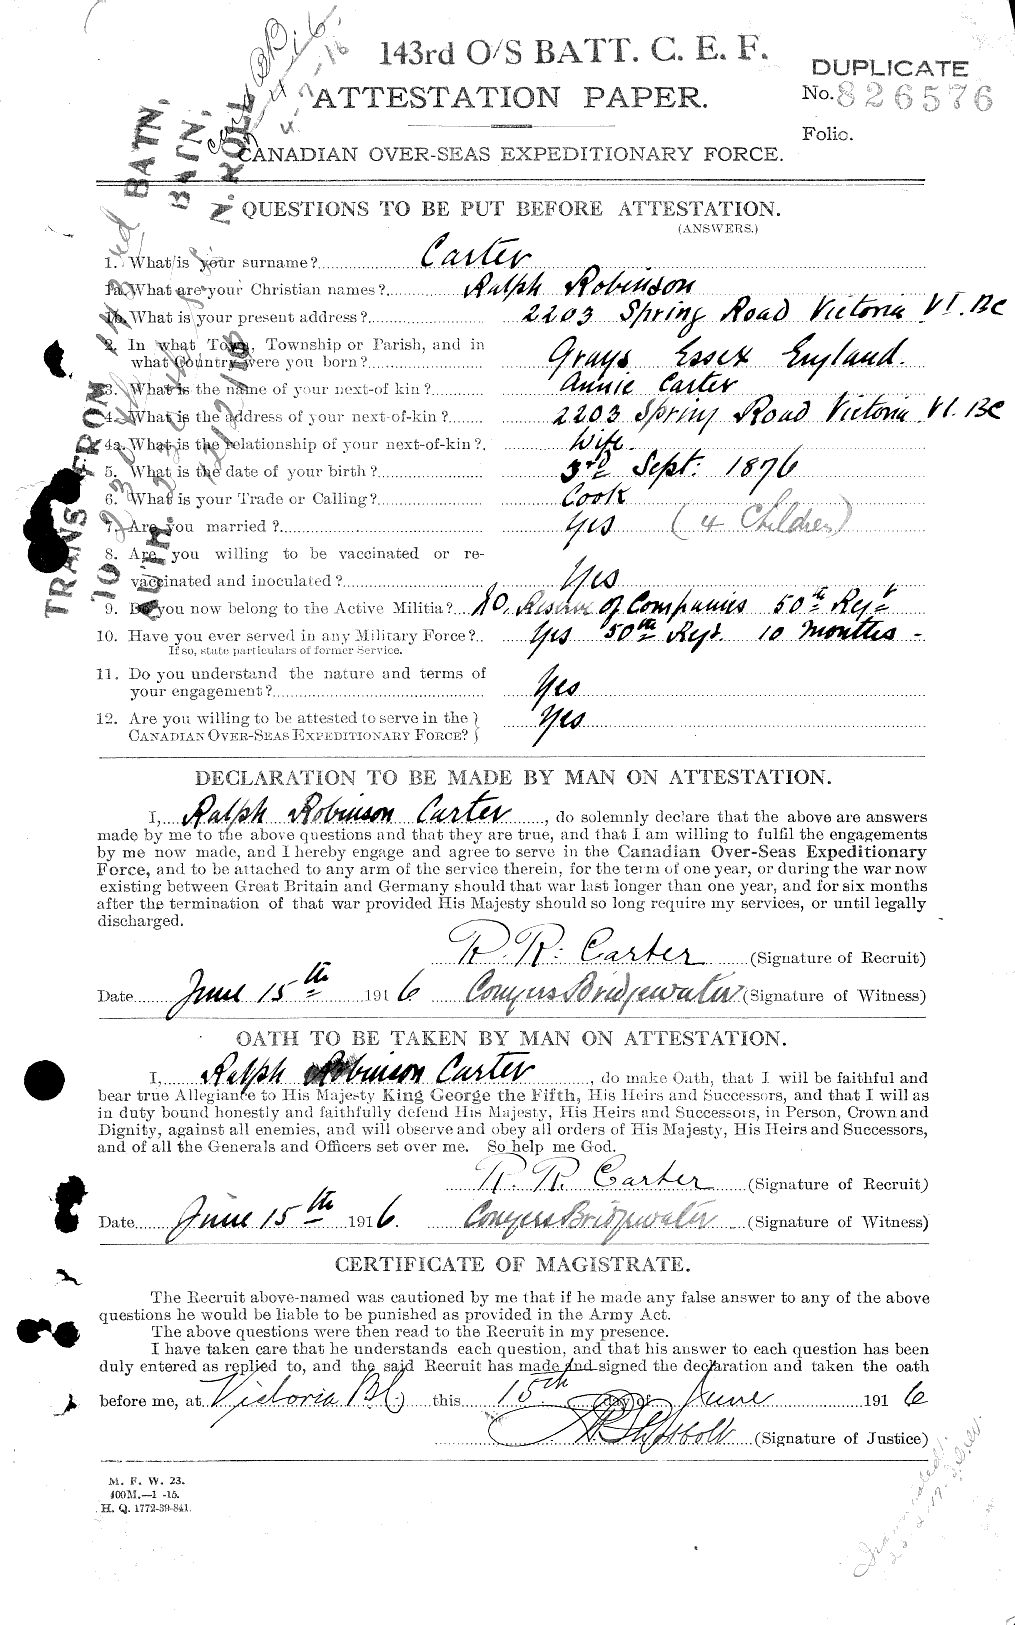 Personnel Records of the First World War - CEF 006132a